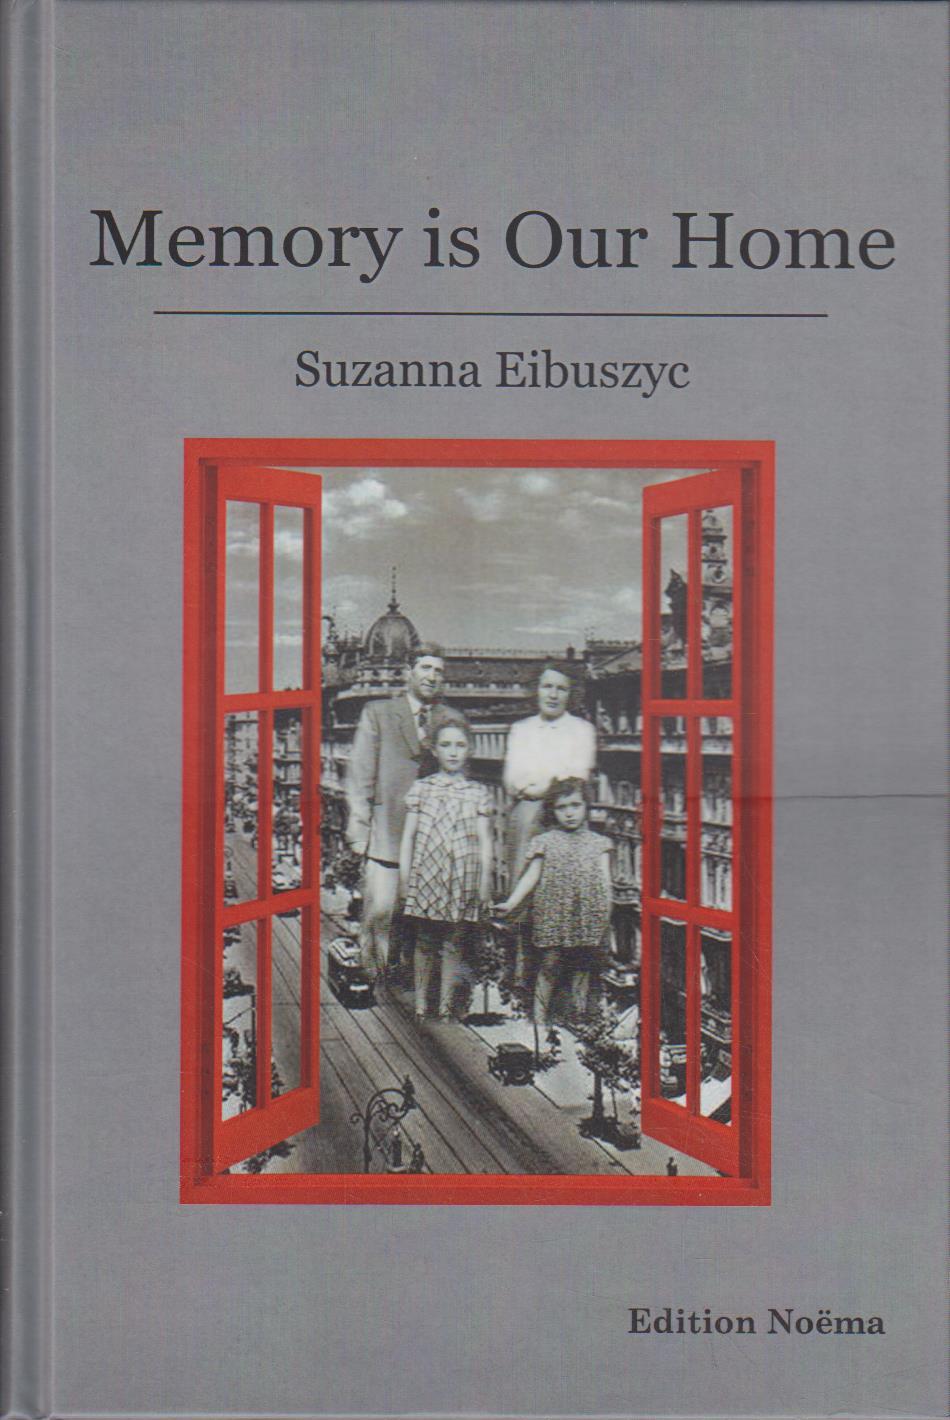 Memory is our home : loss and remembering: three generations in Poland and Russia 1917 - 1960s / Suzanna Eibuszyc / Edition Noëma Loss and Remembering: Three Generations in Poland and Russia 1917-1960s 1., Aufl. - Eibuszyc, Suzanna